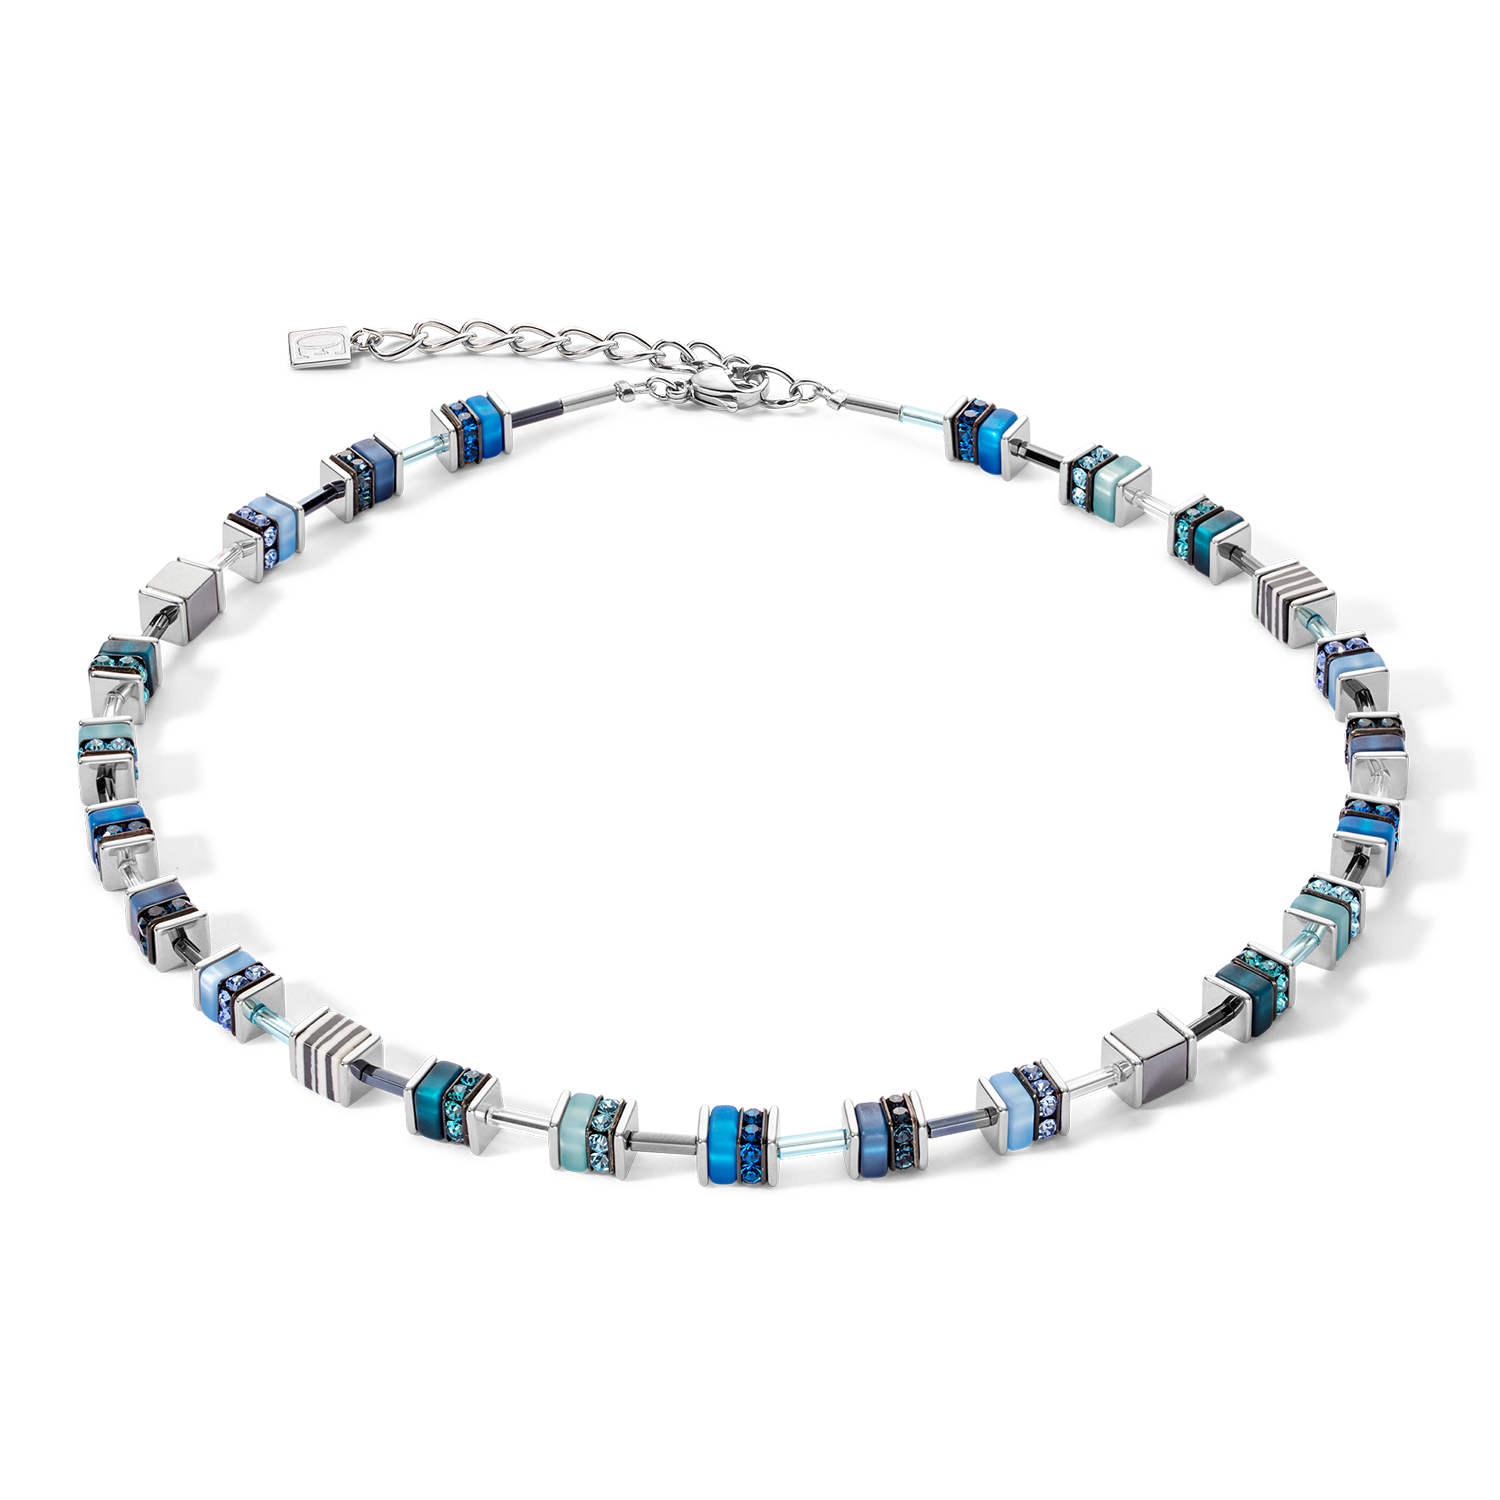 Necklace Sparkling Classic Update blue